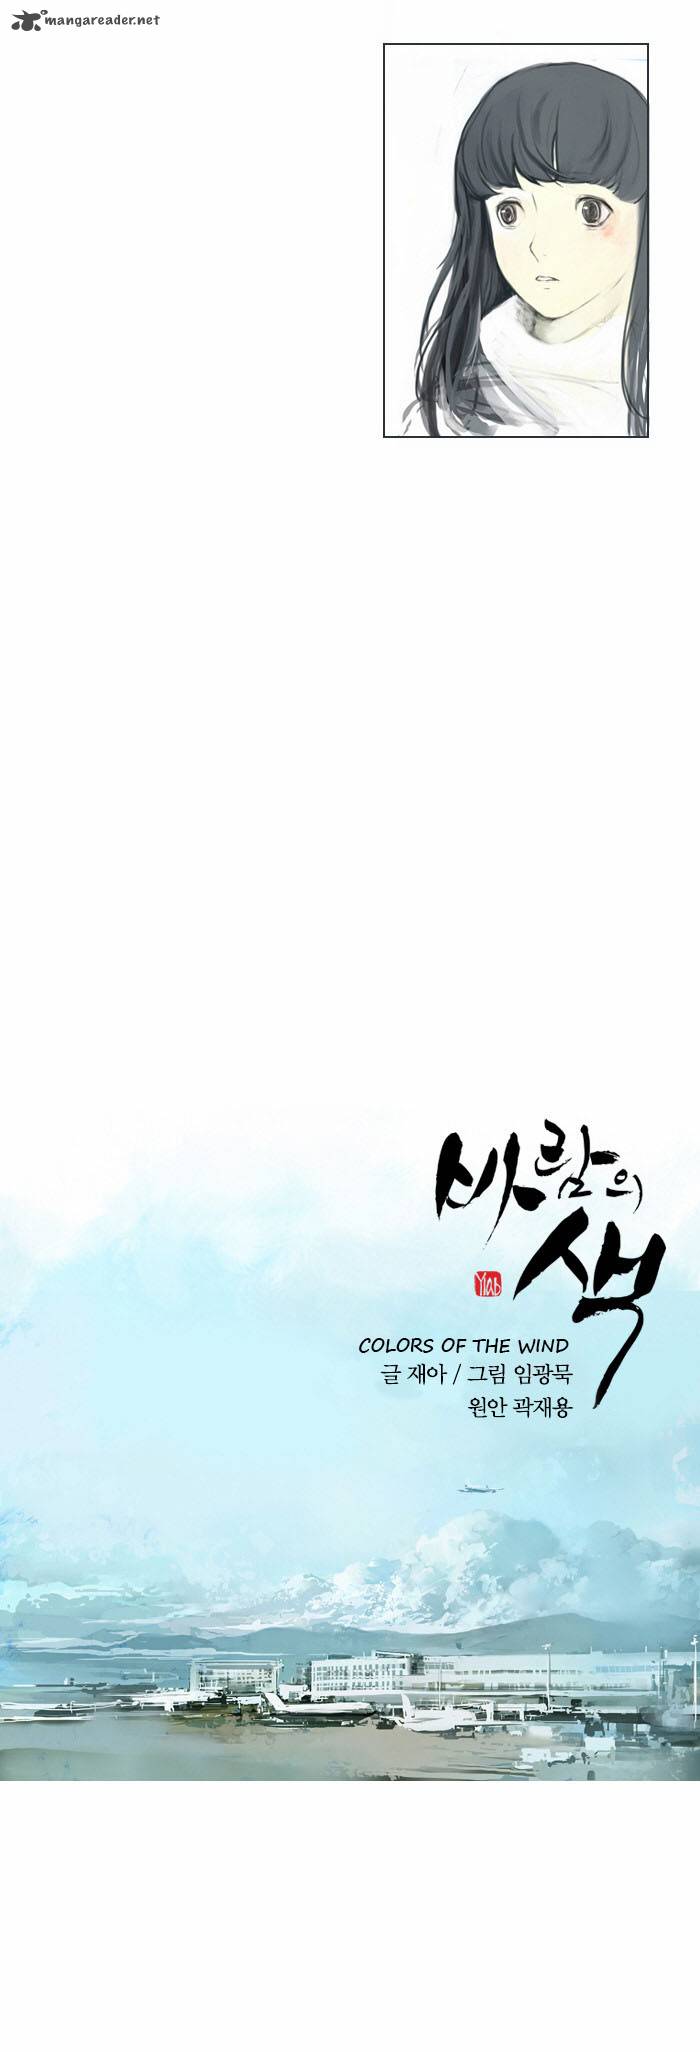 Colors Of The Wind 4 3